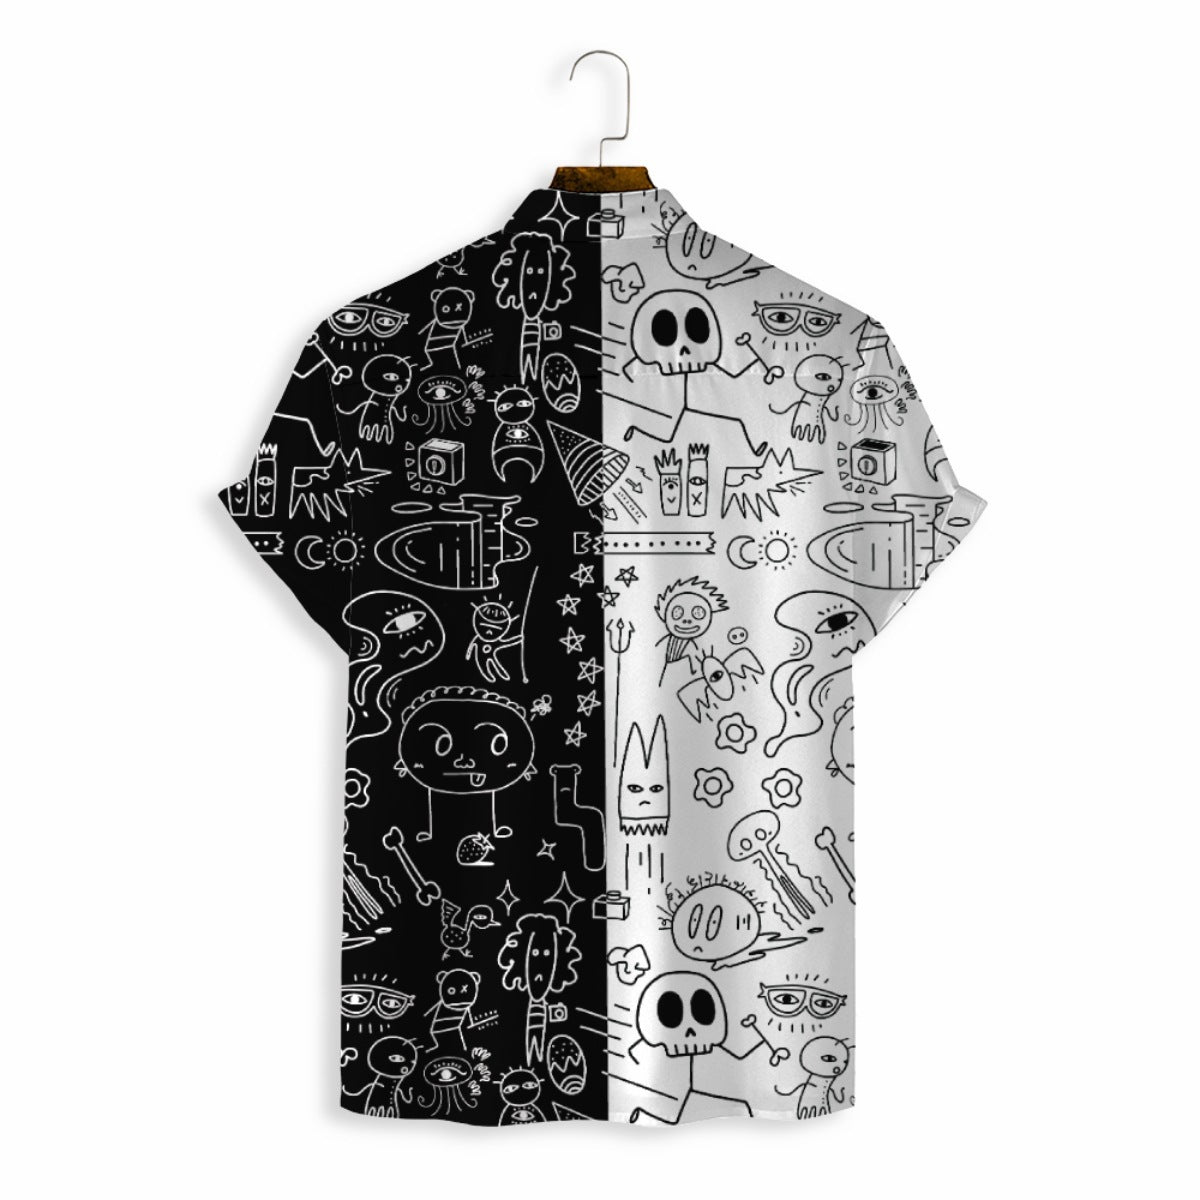 New Abstract Black And White Men's Casual Short Sleeve